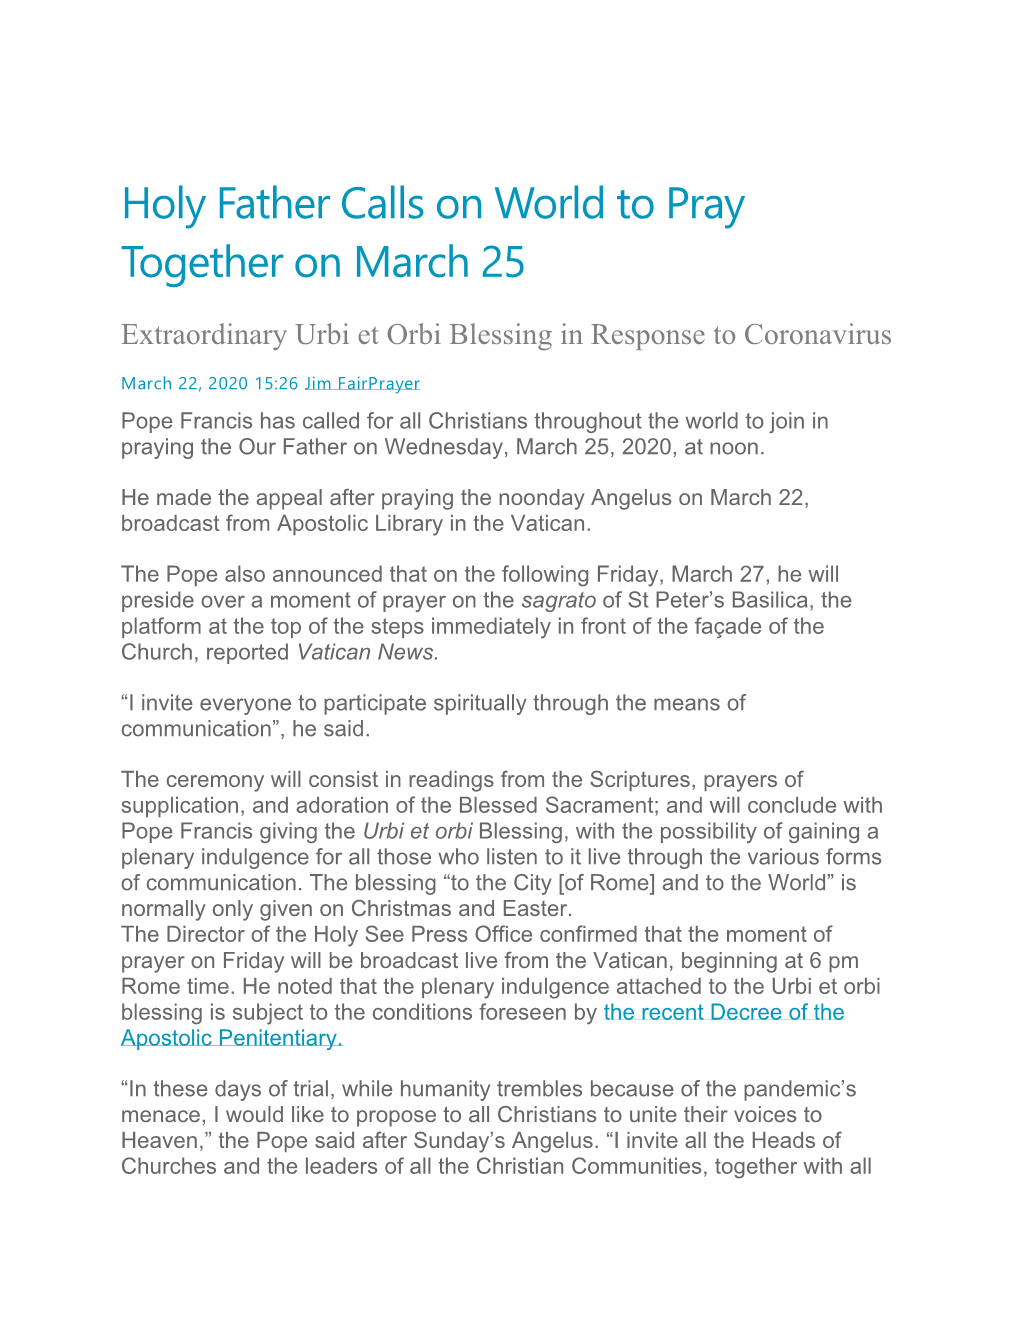 Holy Father Calls on World to Pray Together on March 25